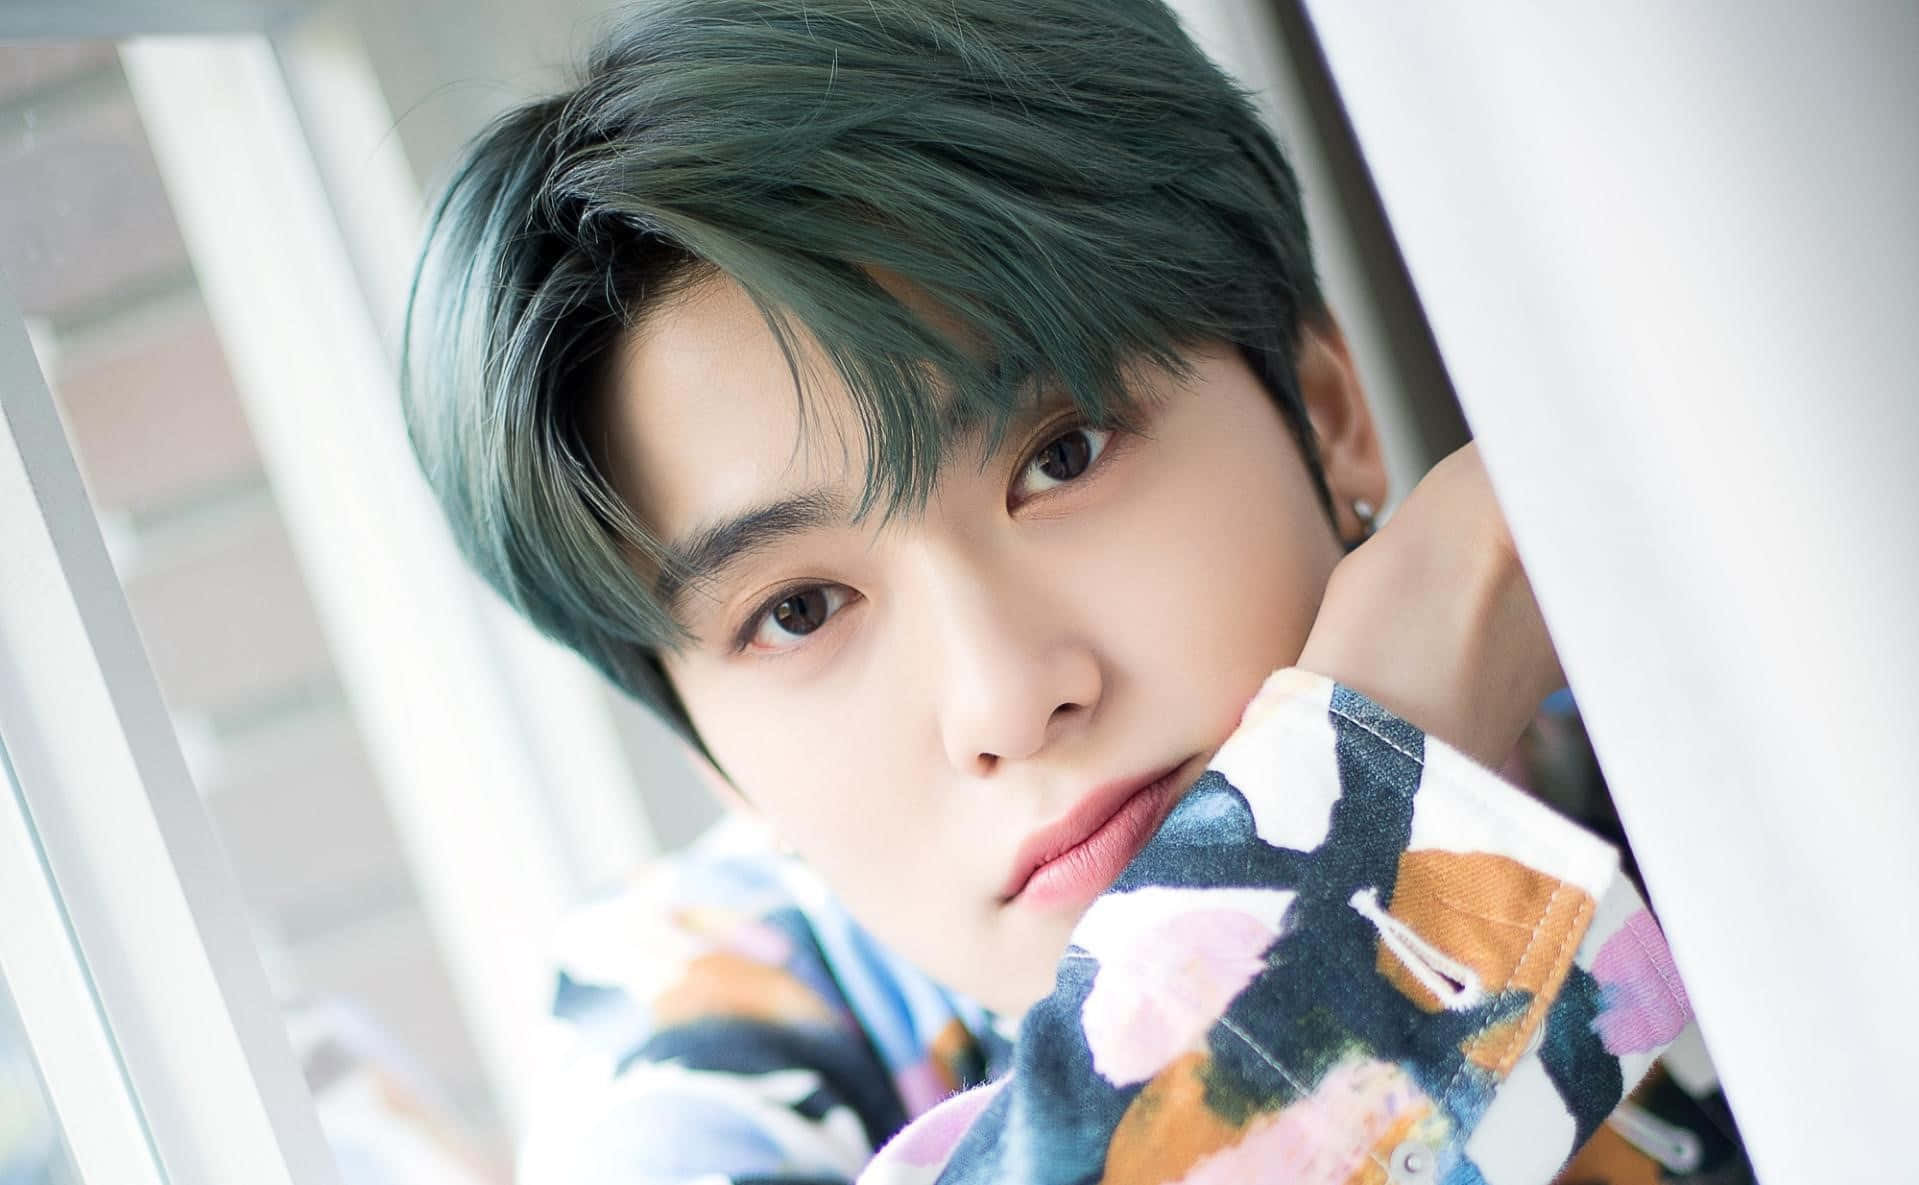 Nct Jaehyun With Green Hair Background